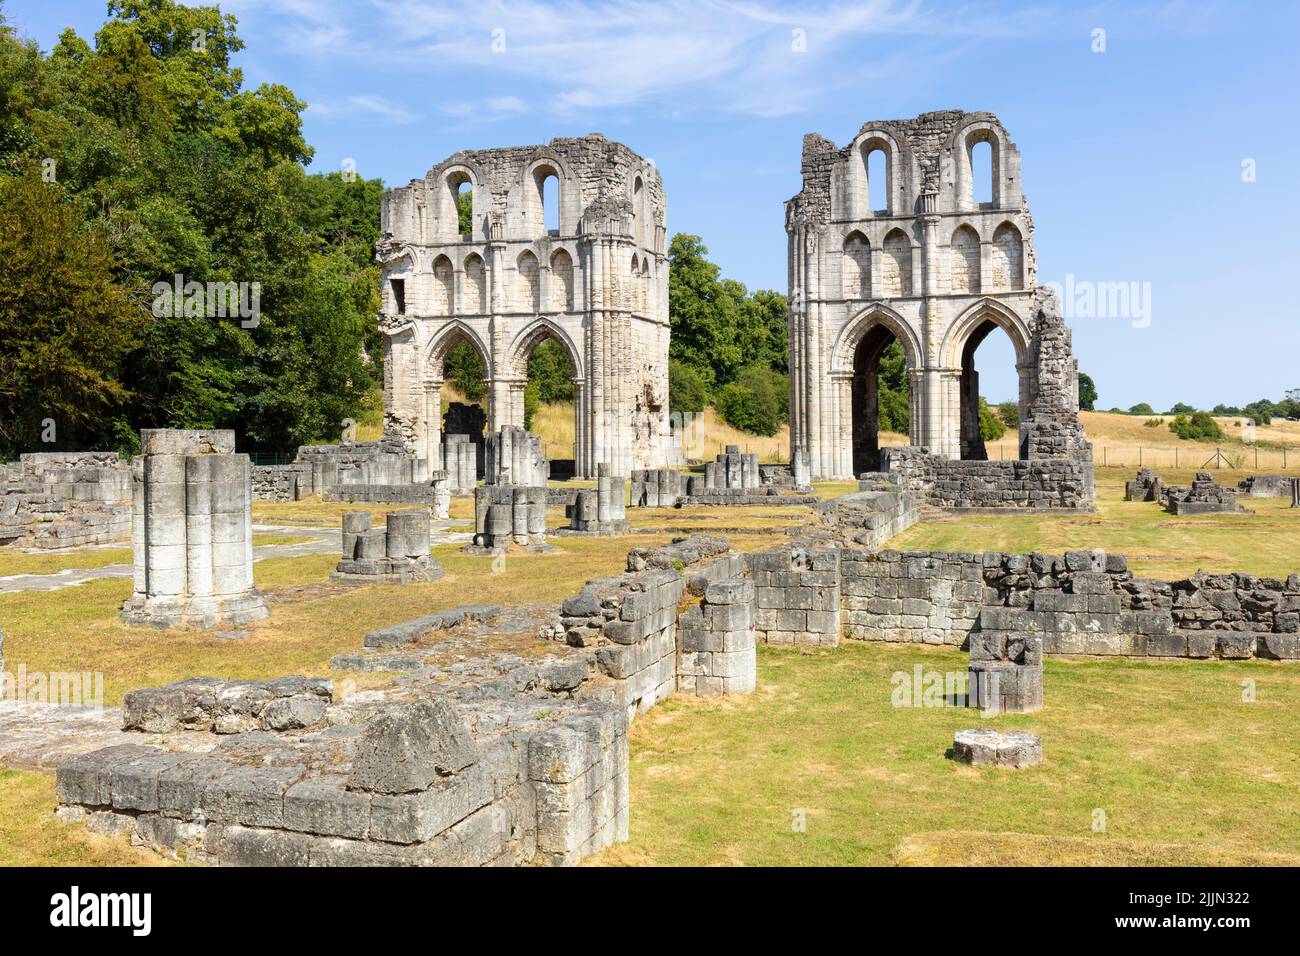 Roche Abbey ruins of an English Cistercian monastery near Maltby and  Rotherham South Yorkshire England UK GB Europe Stock Photo